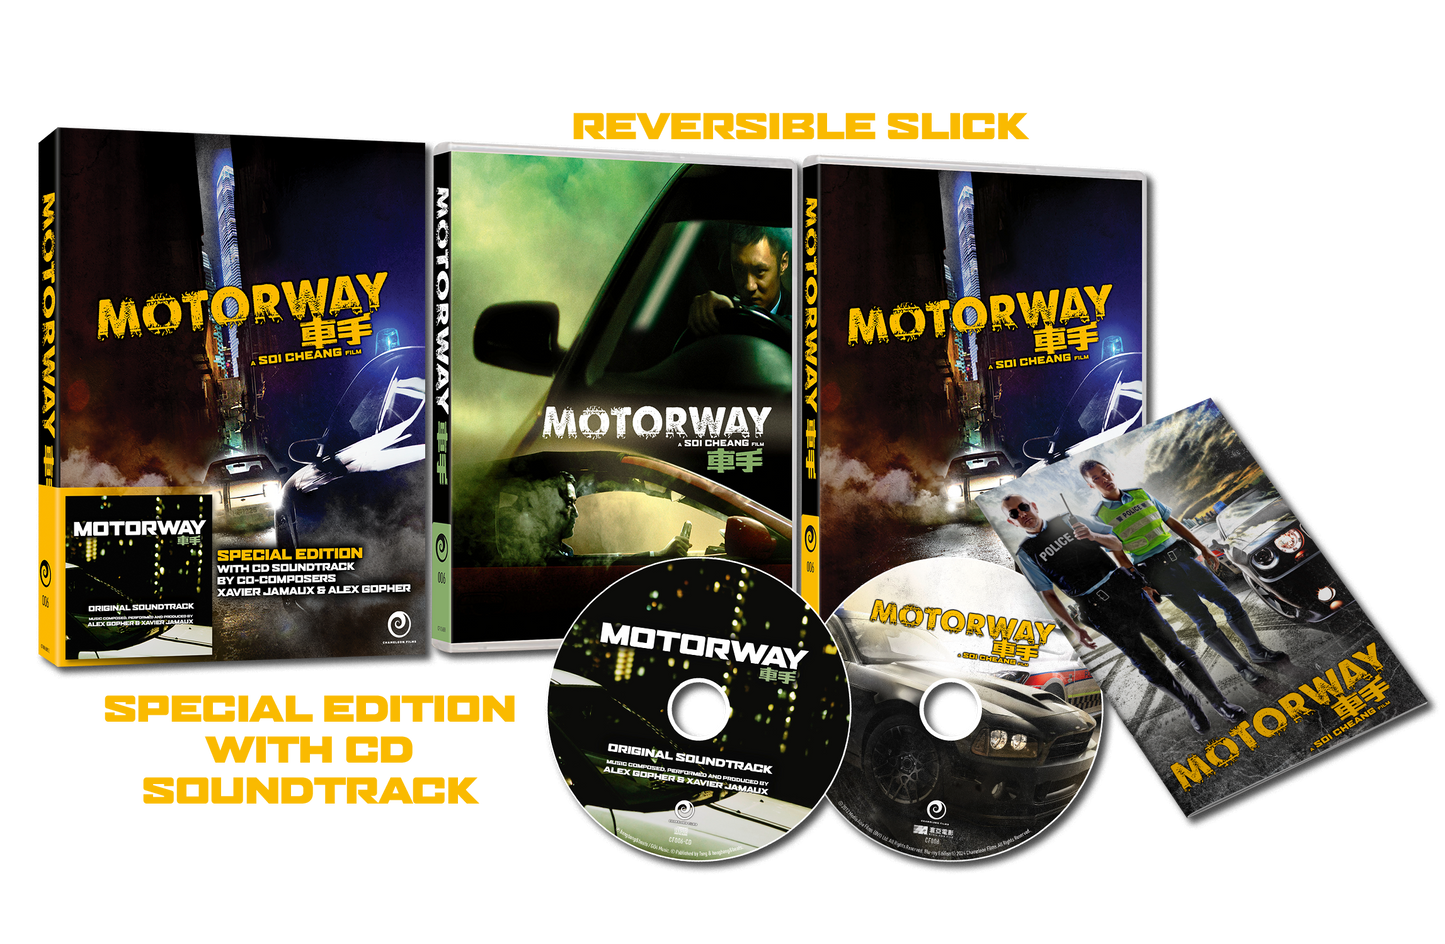 Motorway (Blu-ray) - Special Edition with CD Soundtrack